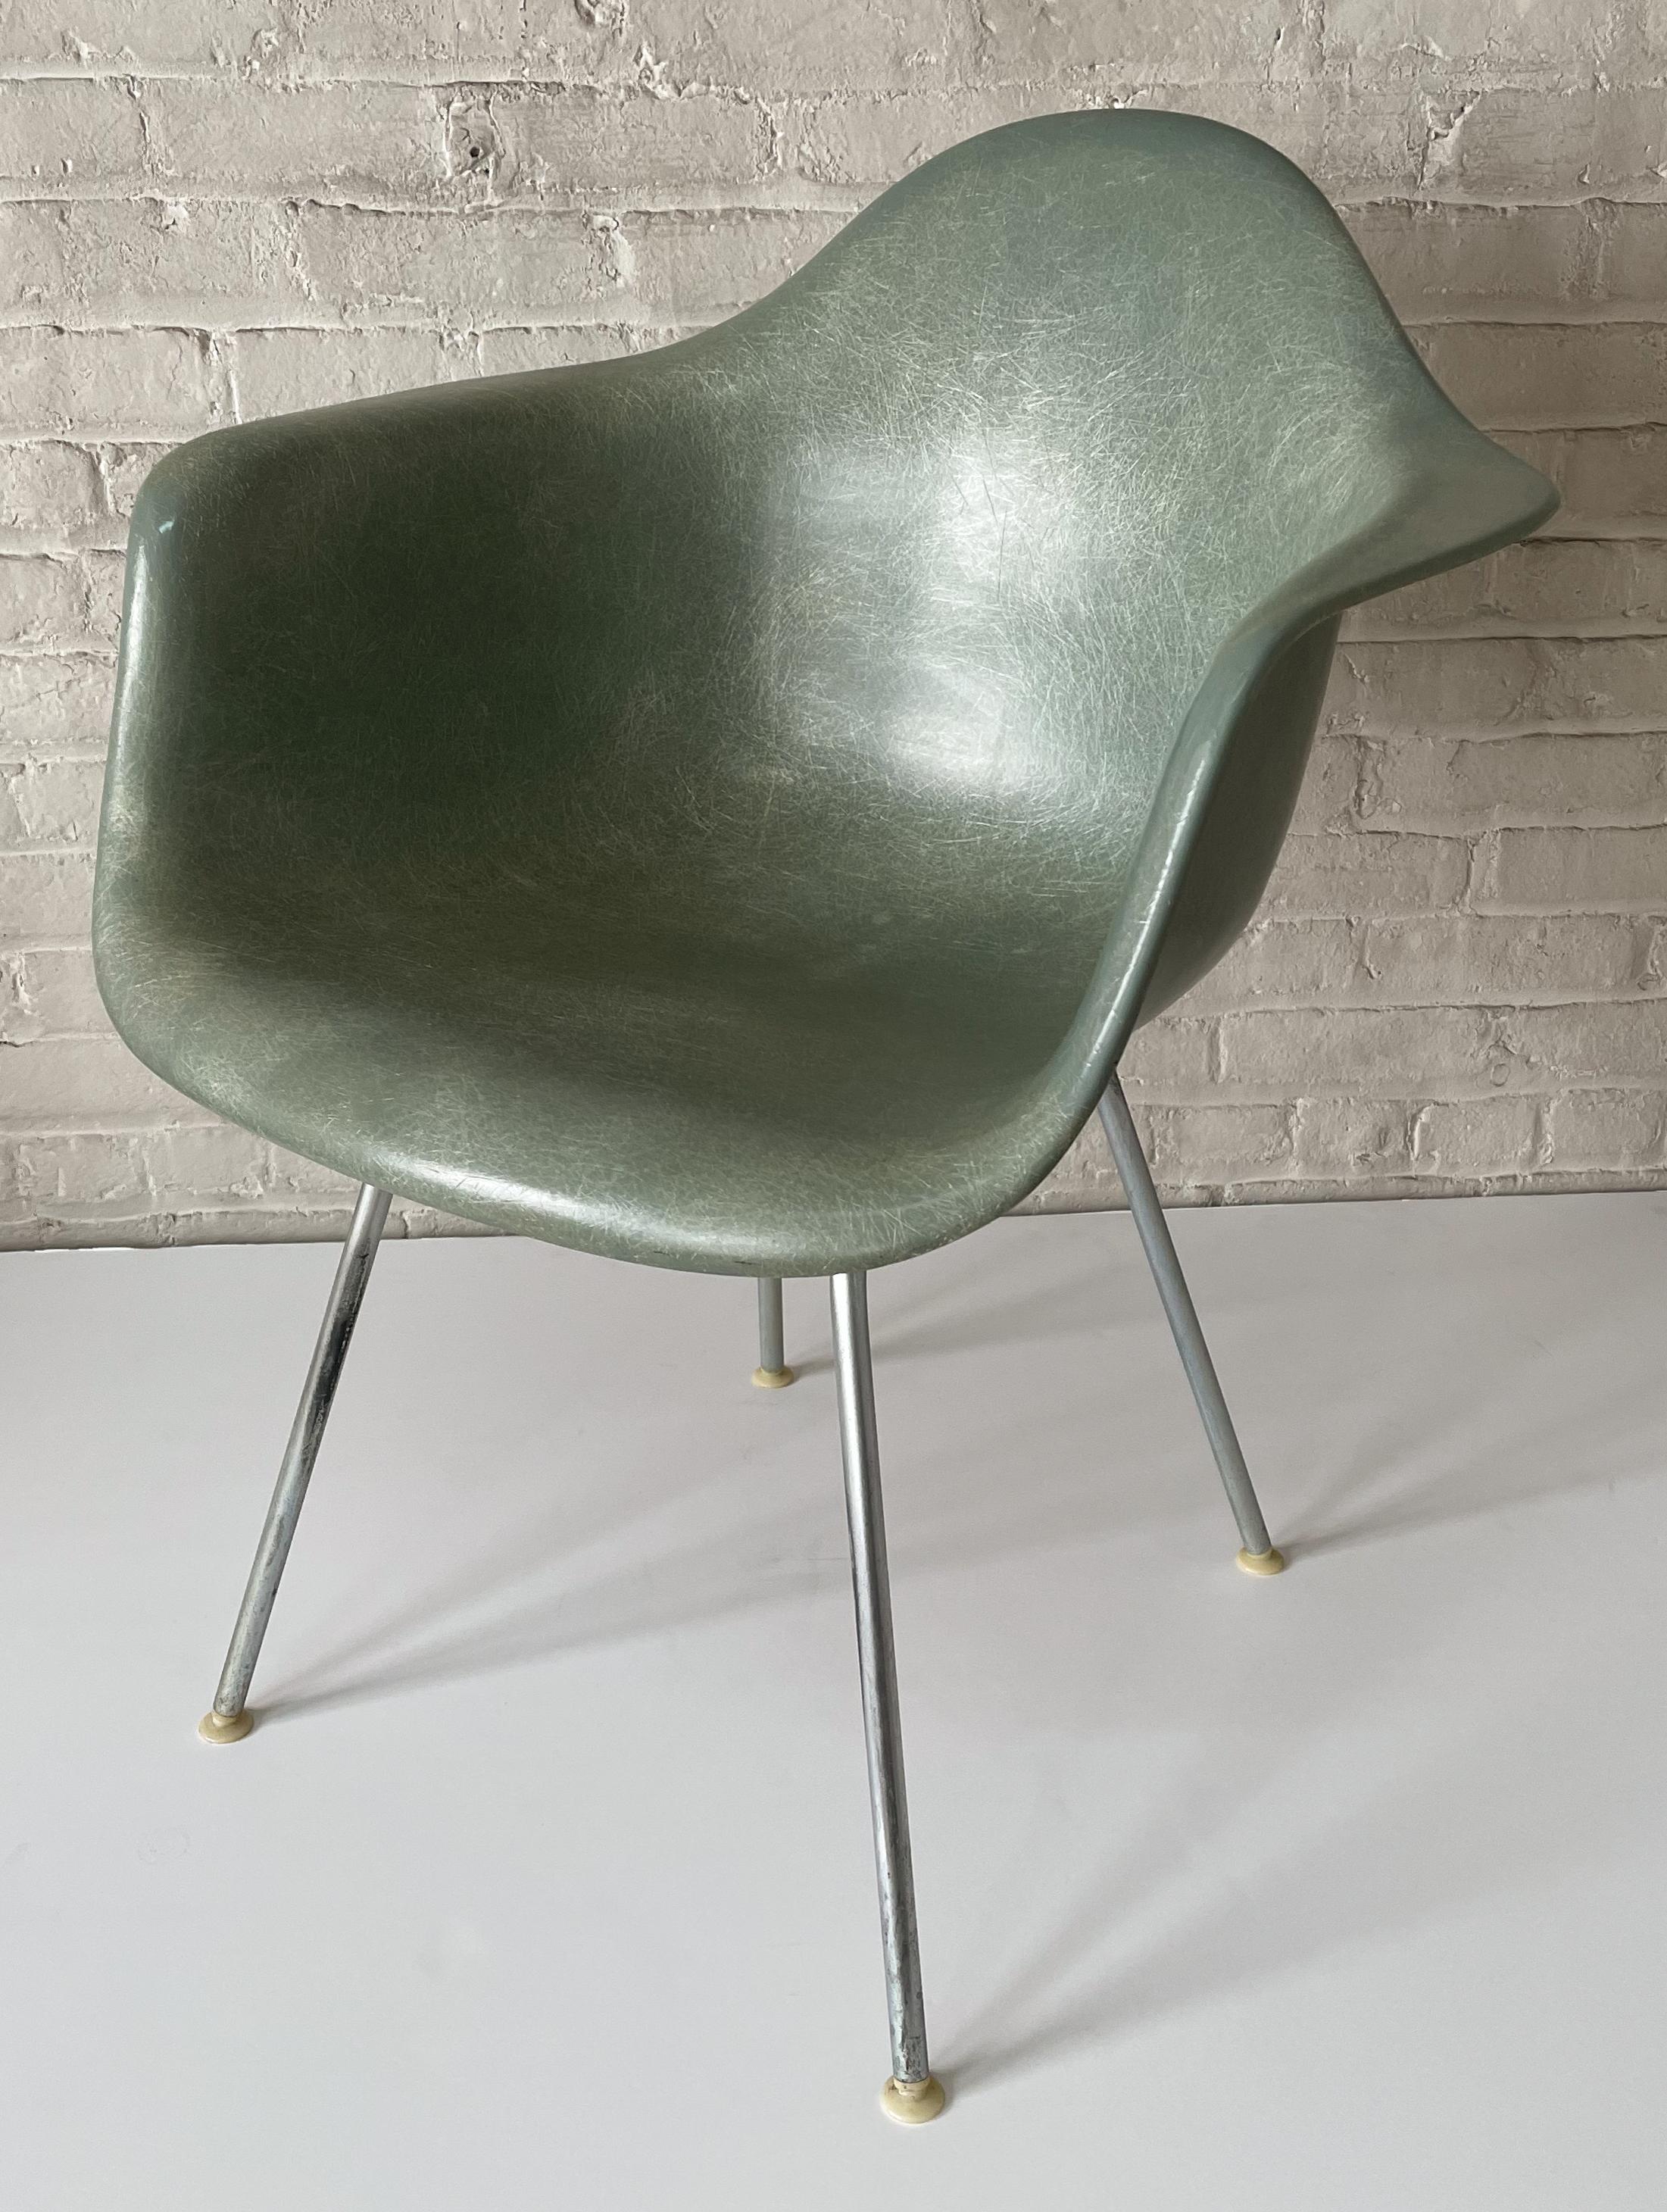 DAX chair of molded fiberglass with zinc-plated steel legs, plastic glides, and rubber shock mounts. An iconic 1950 design by Charles and Ray Eames for Herman miller in the desirable seafoam green color. This example dated 1959. In fine original